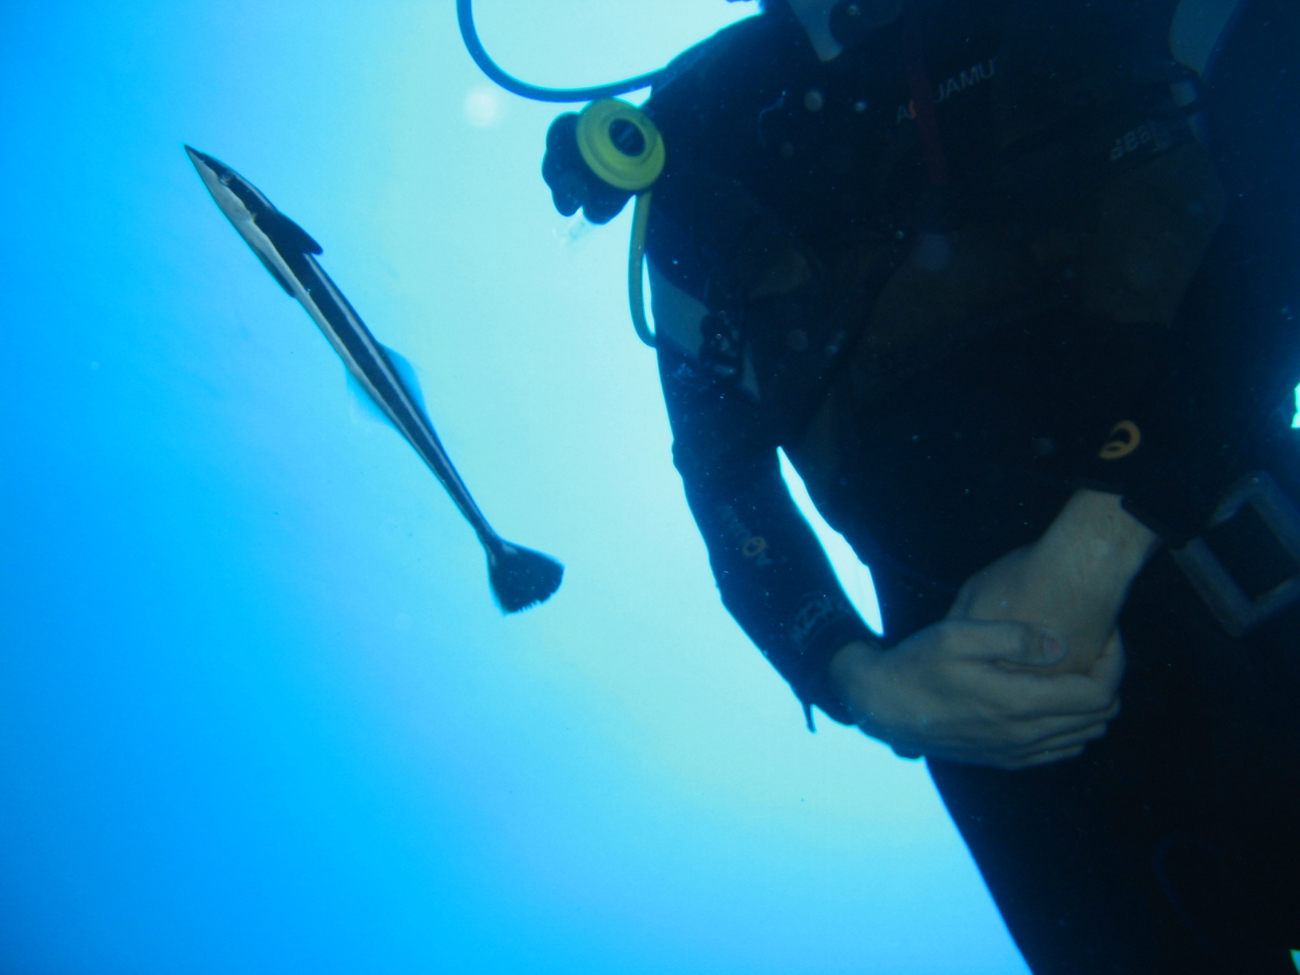 Confused remora shadowing diver (Echeneis naucrates)